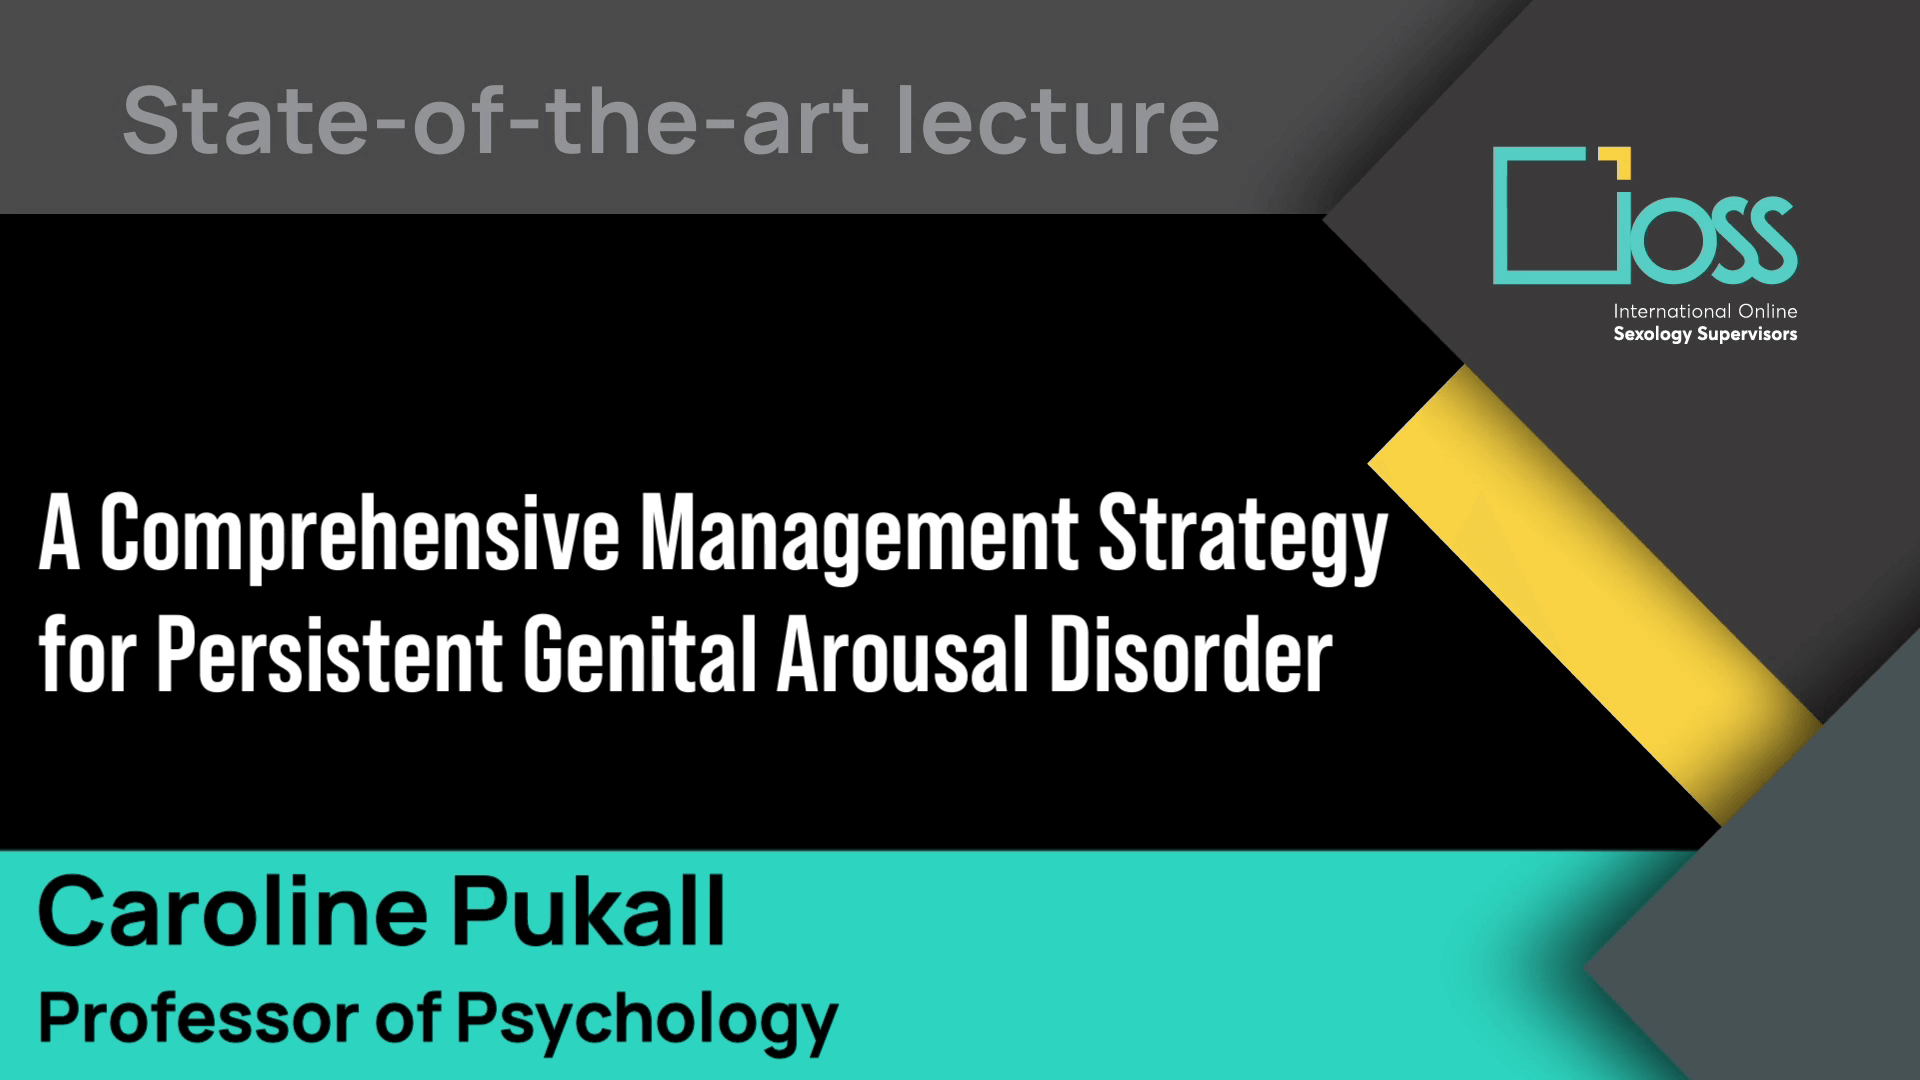 A Comprehensive Management Strategy for Persistent Genital Arousal Disorder